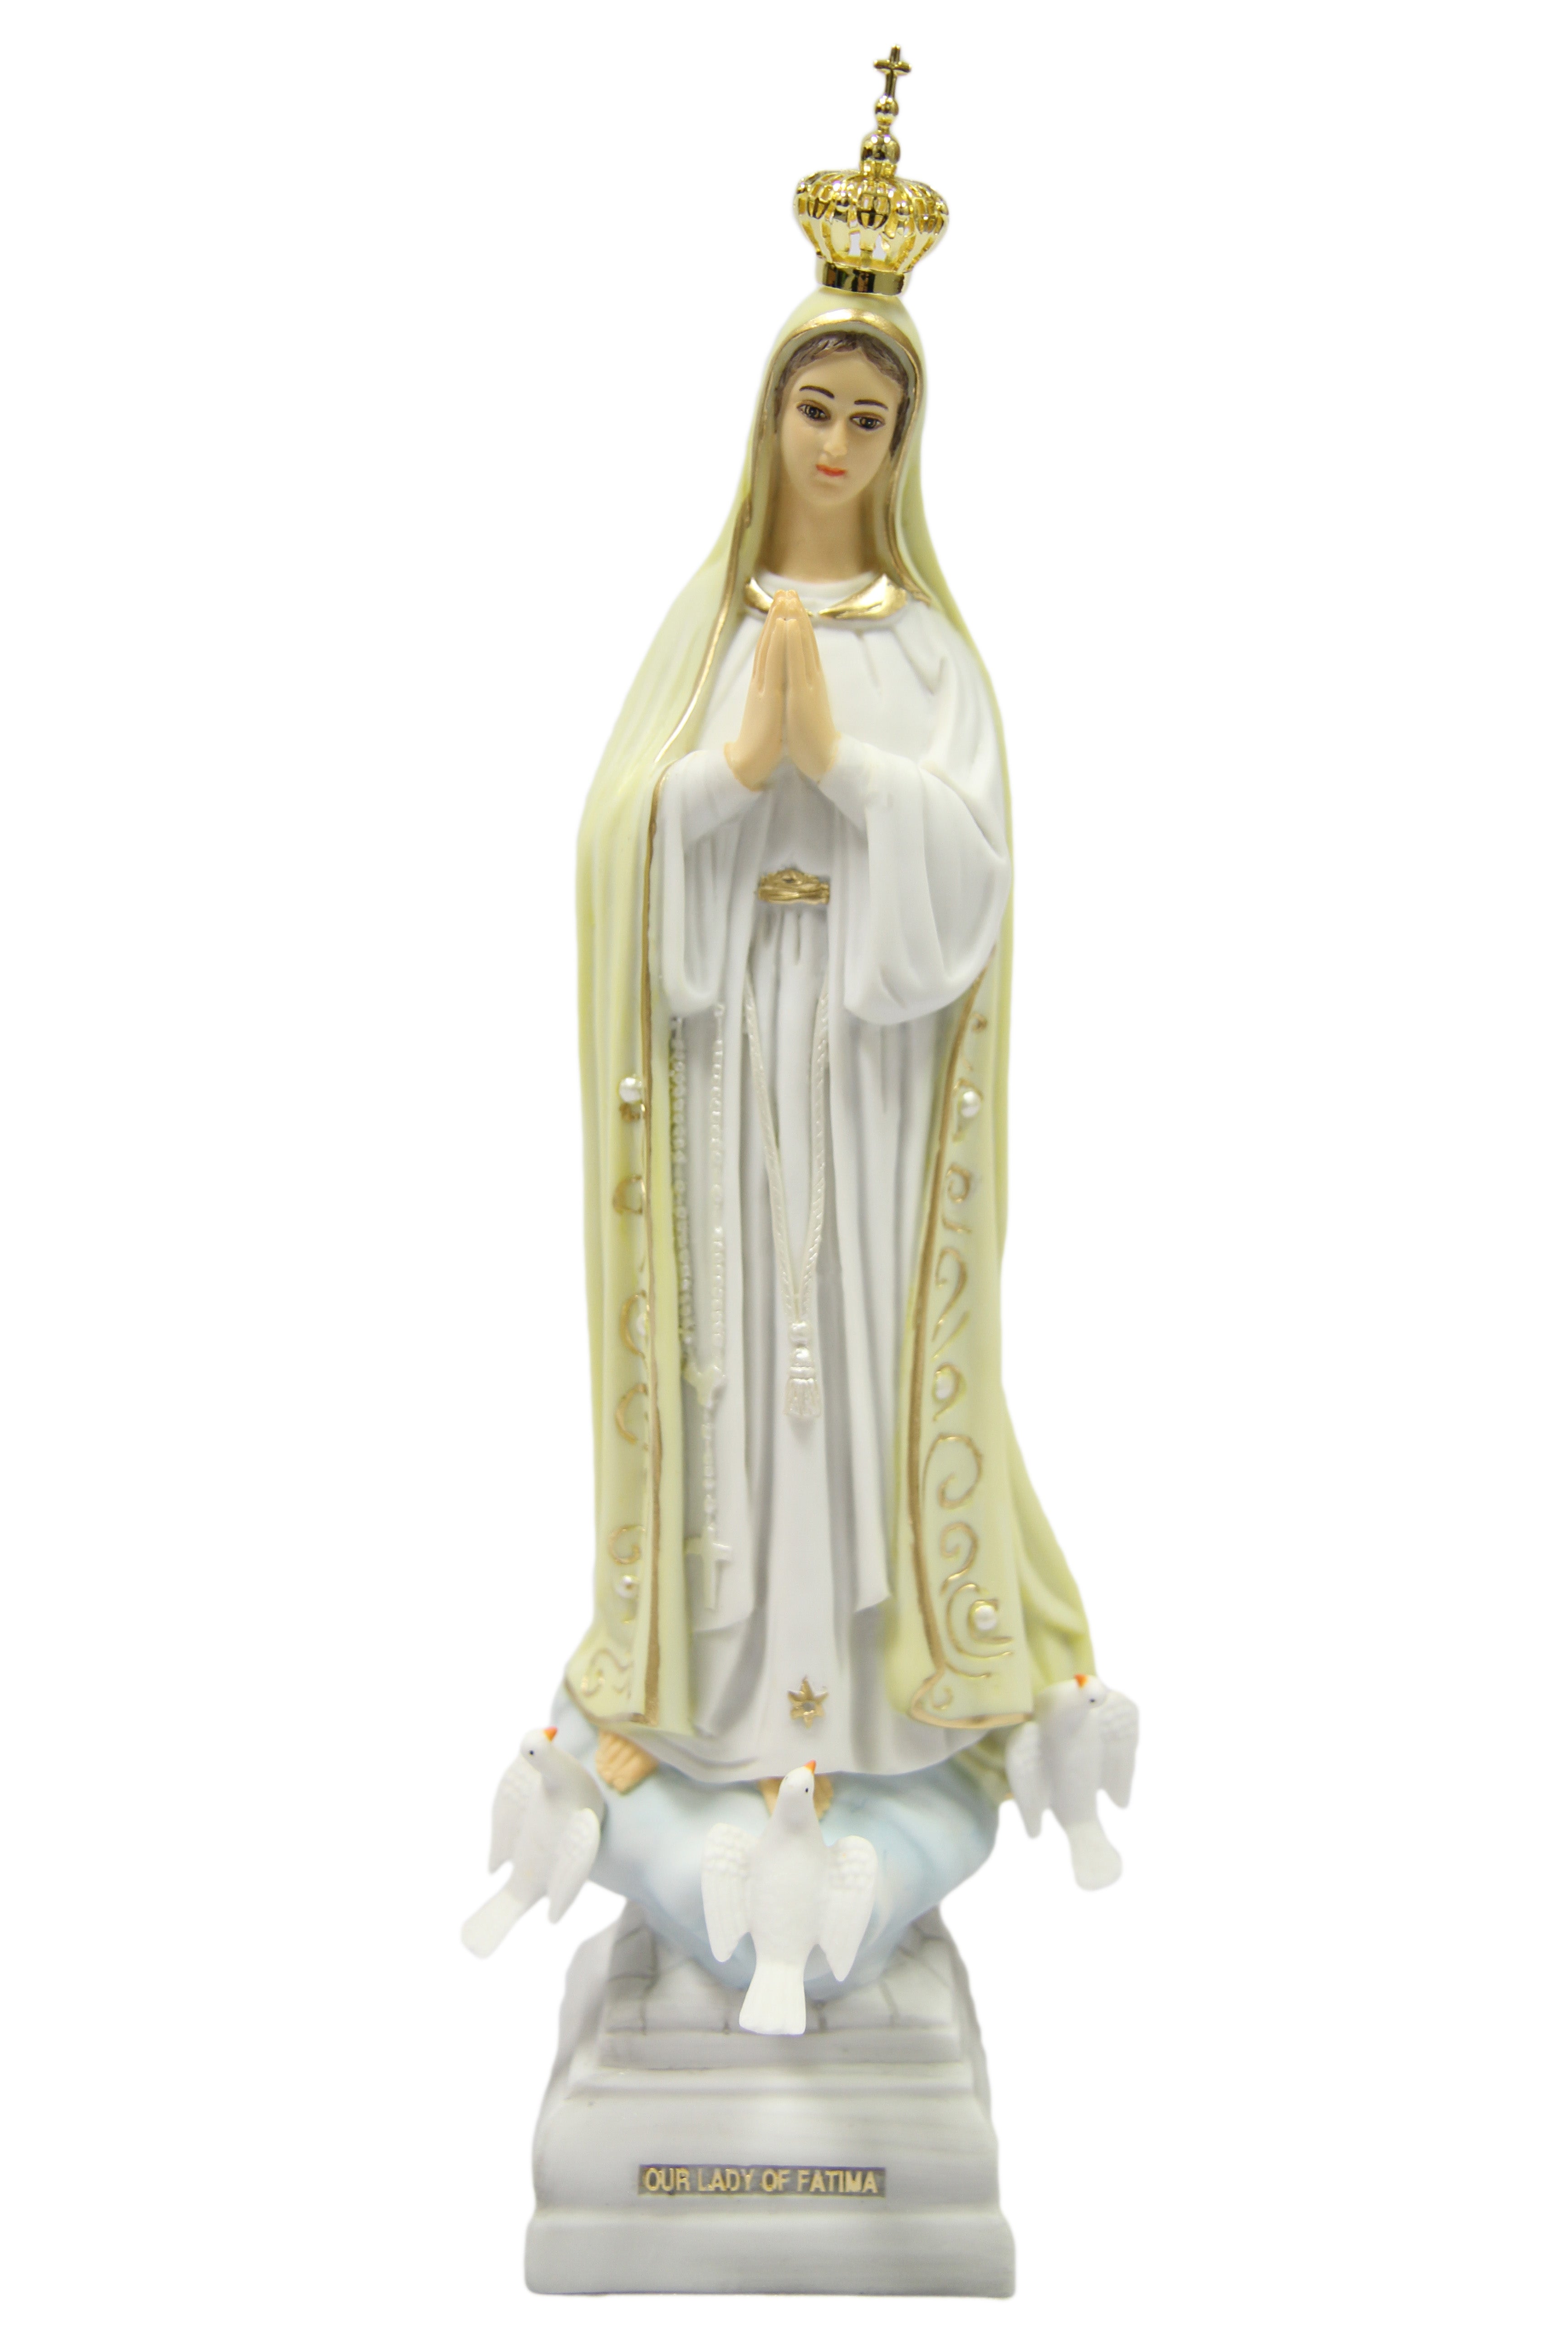 13 Inch Our Lady of Fatima Virgin Mary Catholic Statue Vittoria Collection Made in Italy